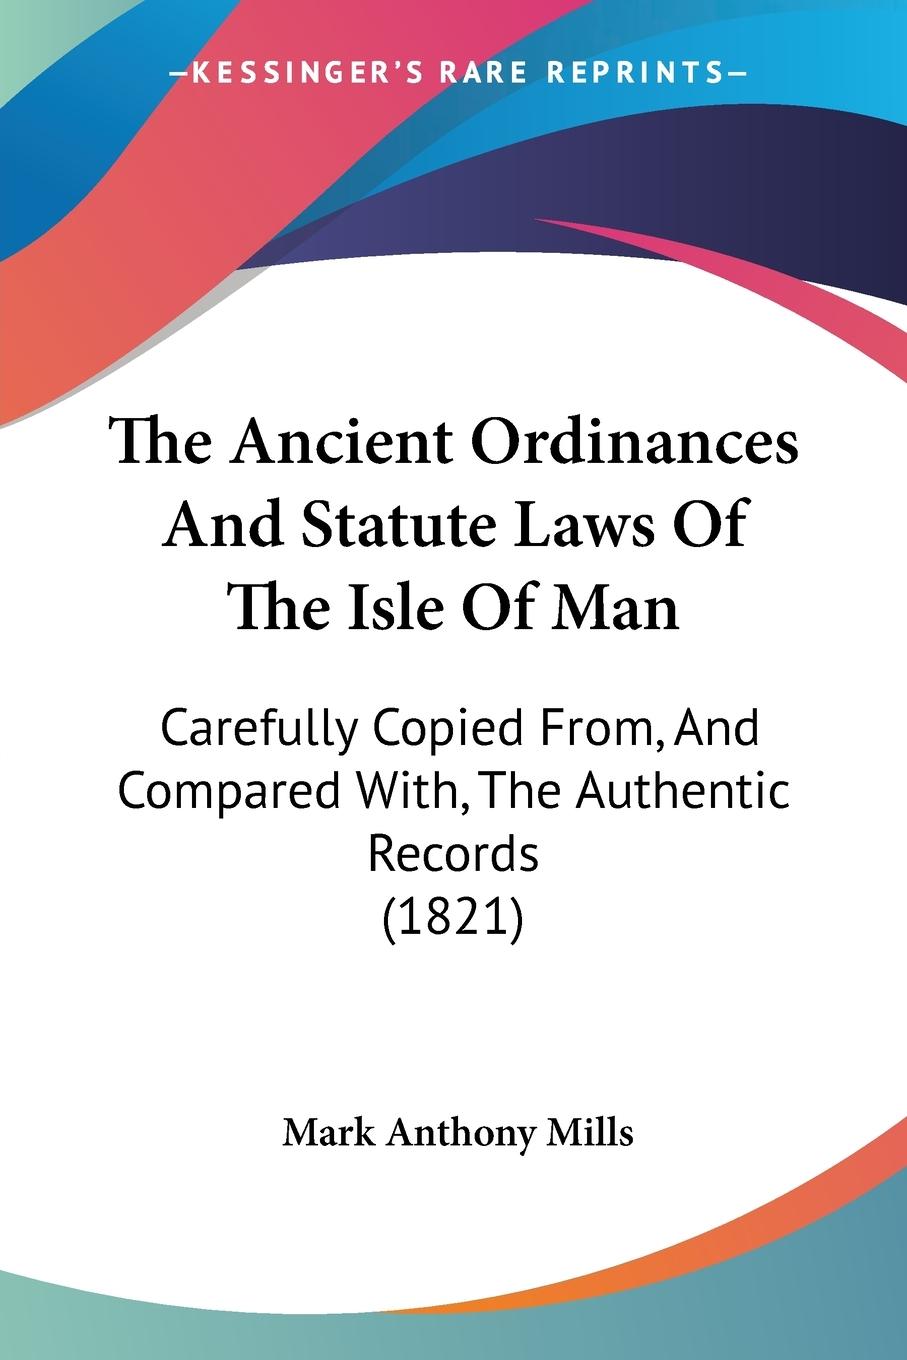 The Ancient Ordinances And Statute Laws Of The Isle Of Man - Mills, Mark Anthony